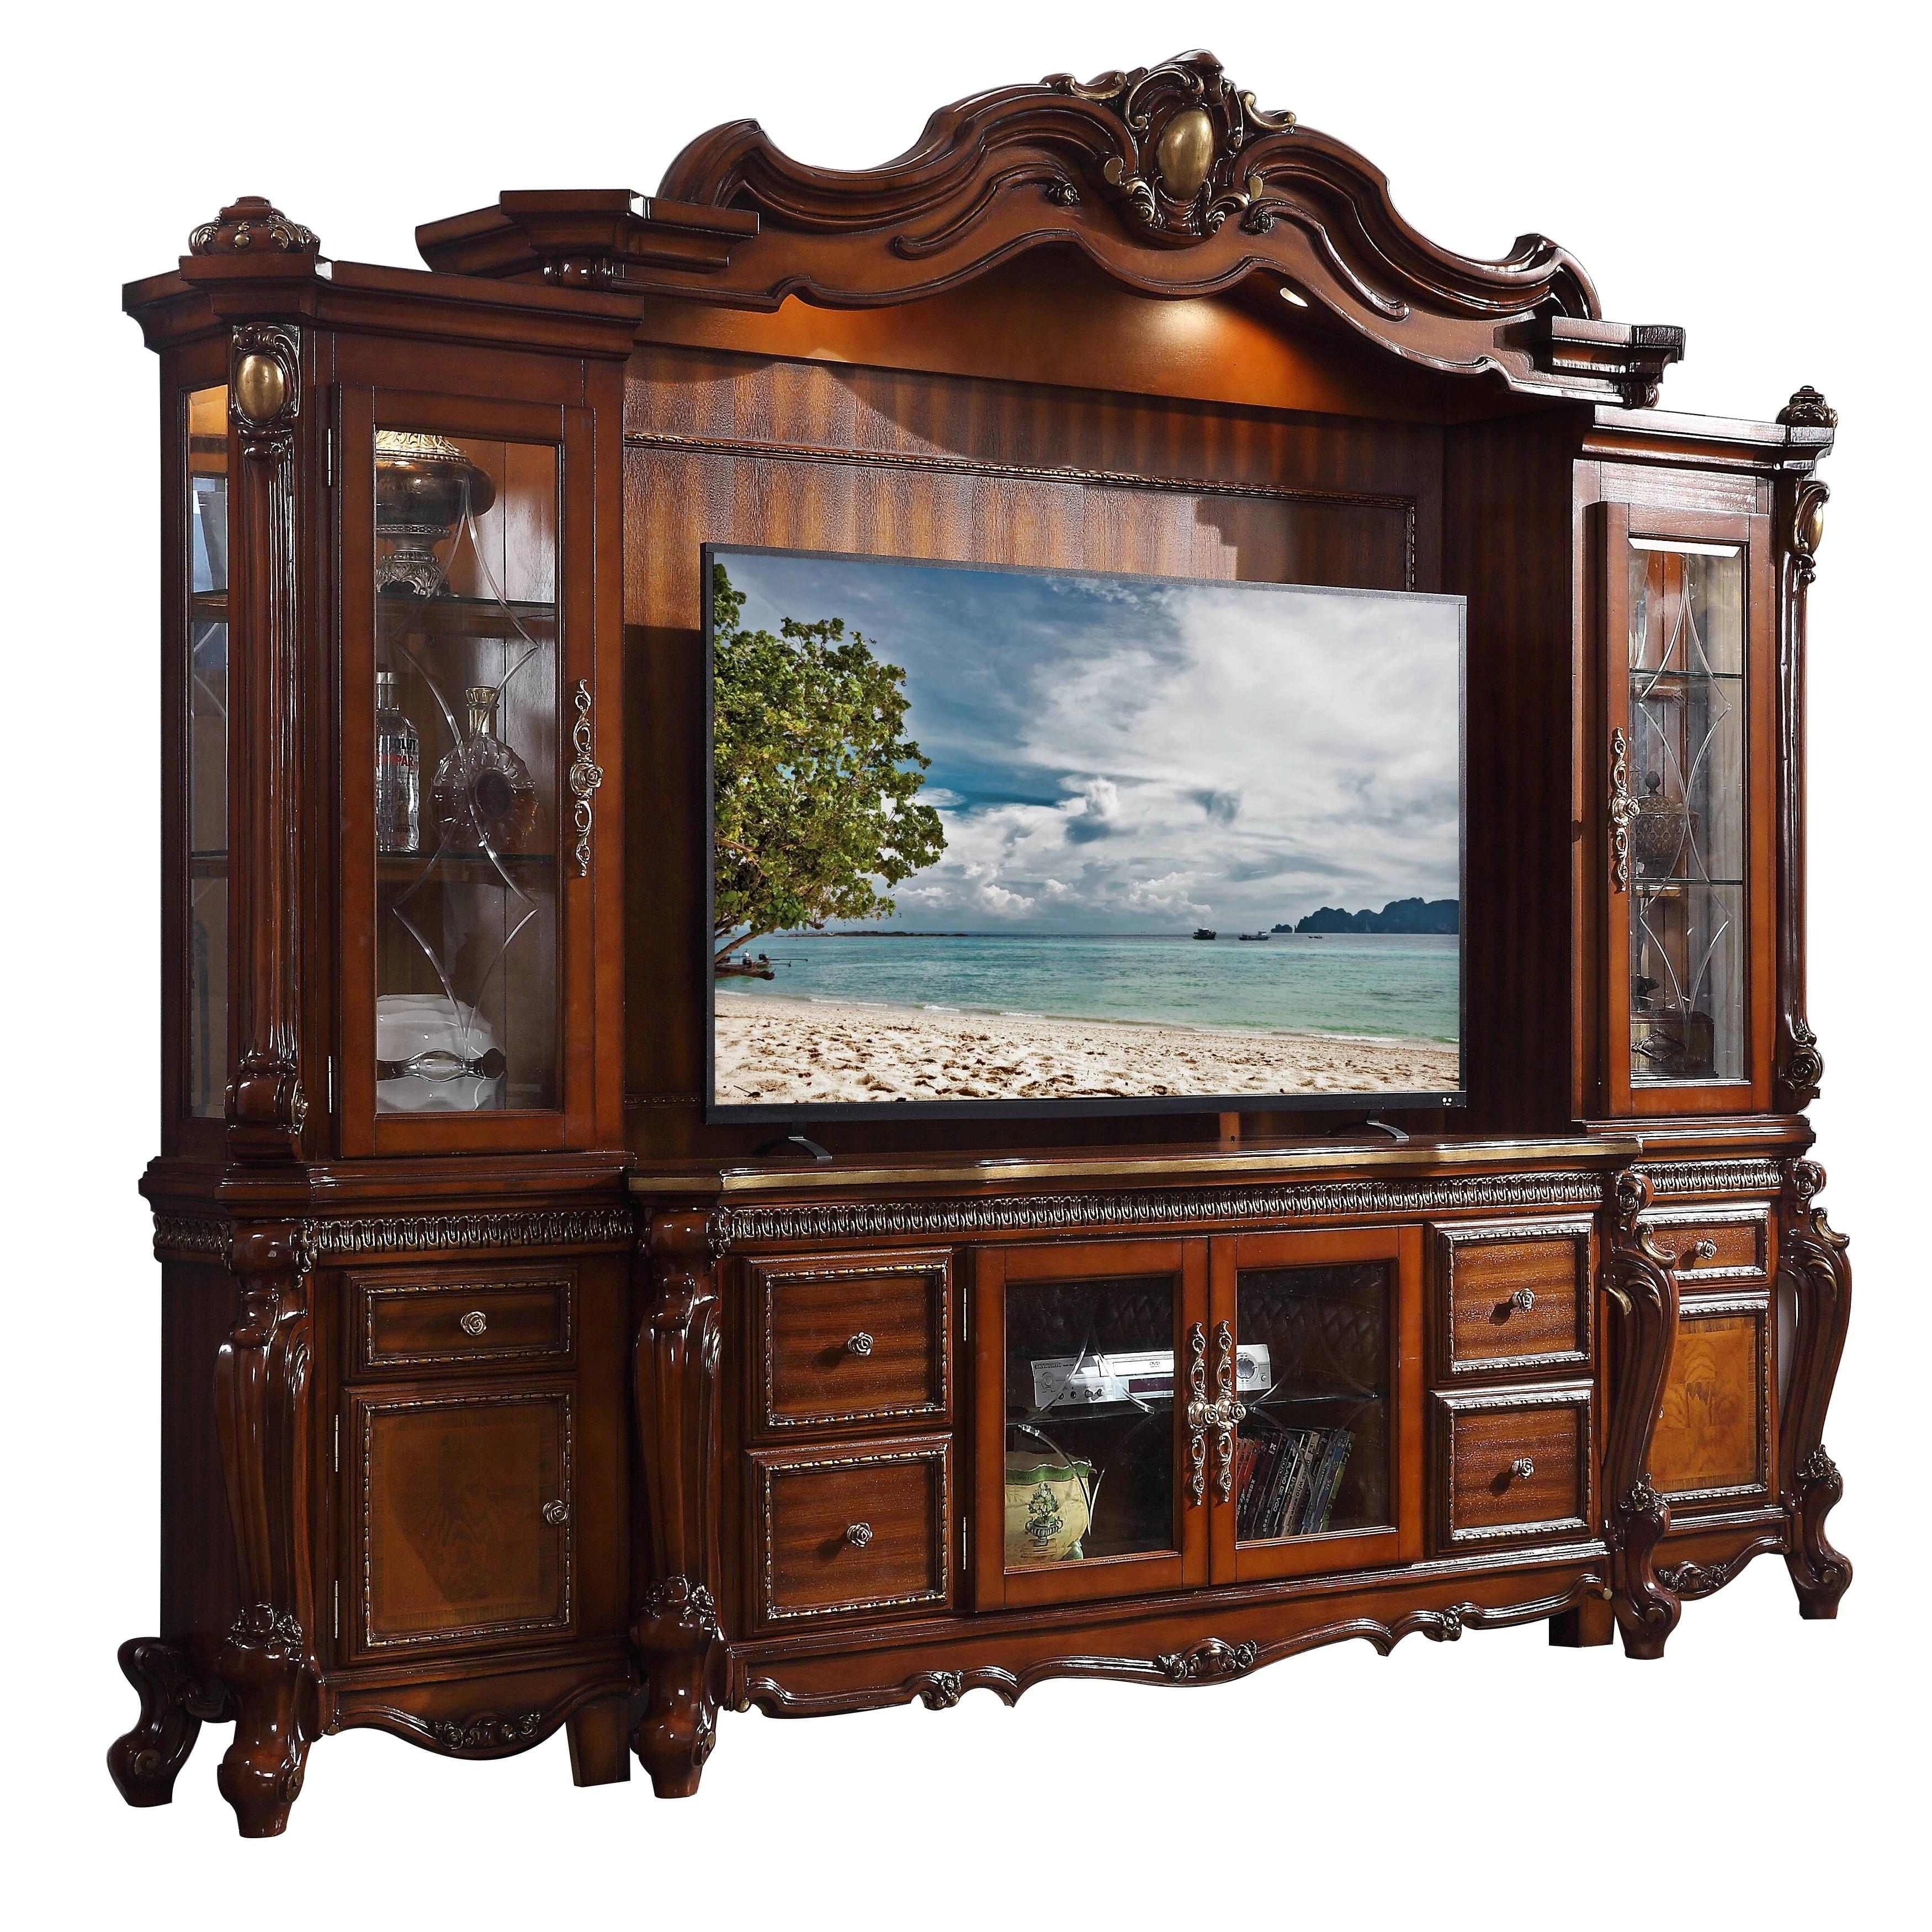 Cherry Oak Regal Entertainment Center with Touch Light Functionality